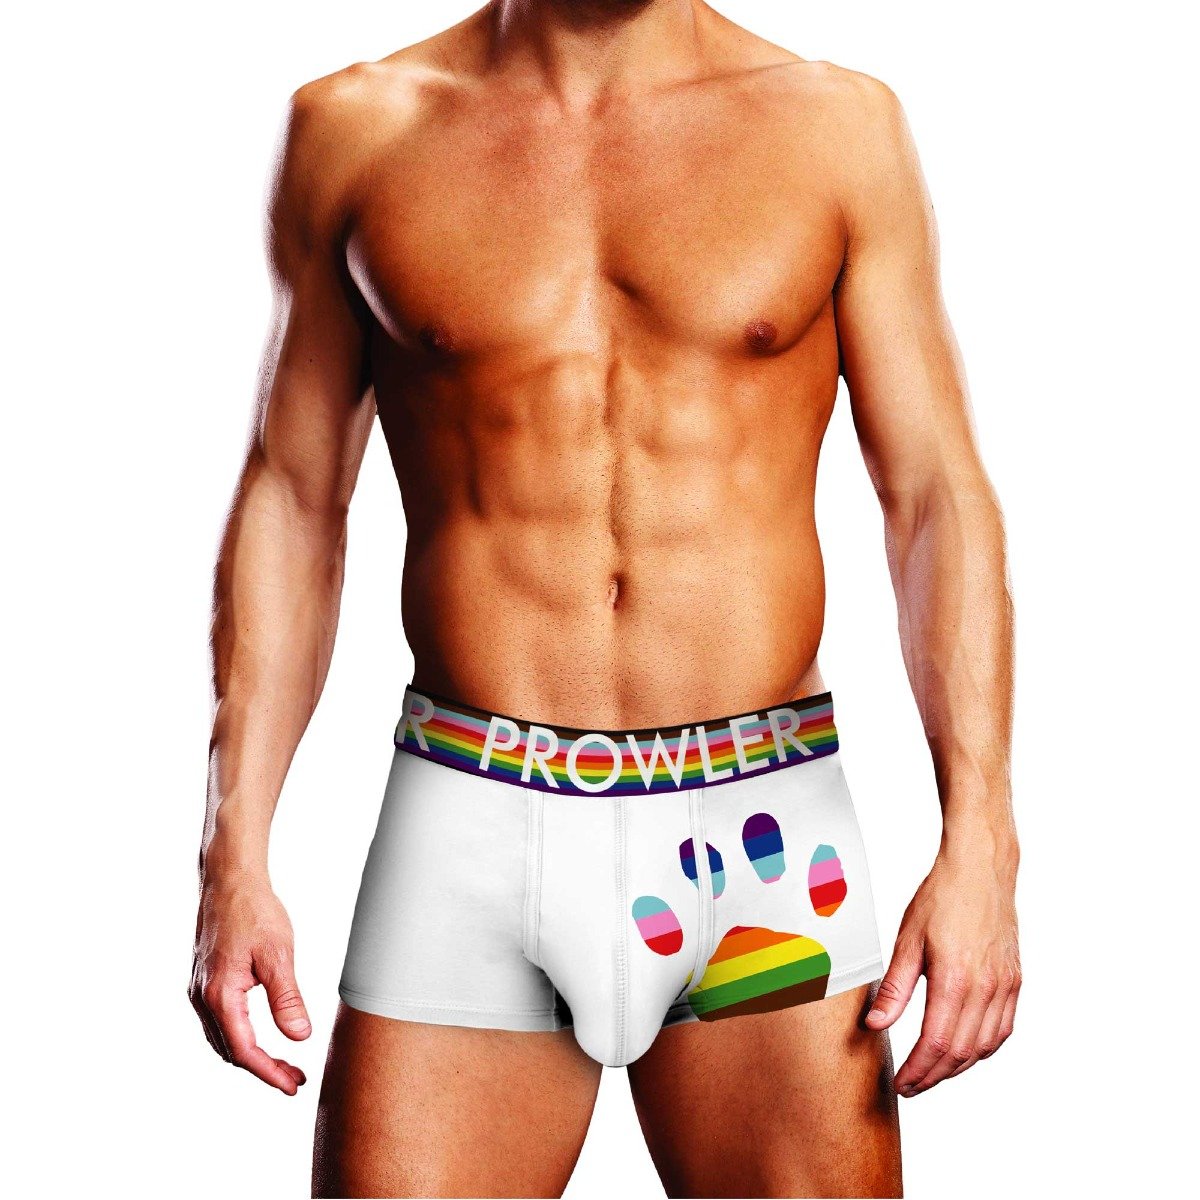 Prowler White Oversized Paw Trunk Small